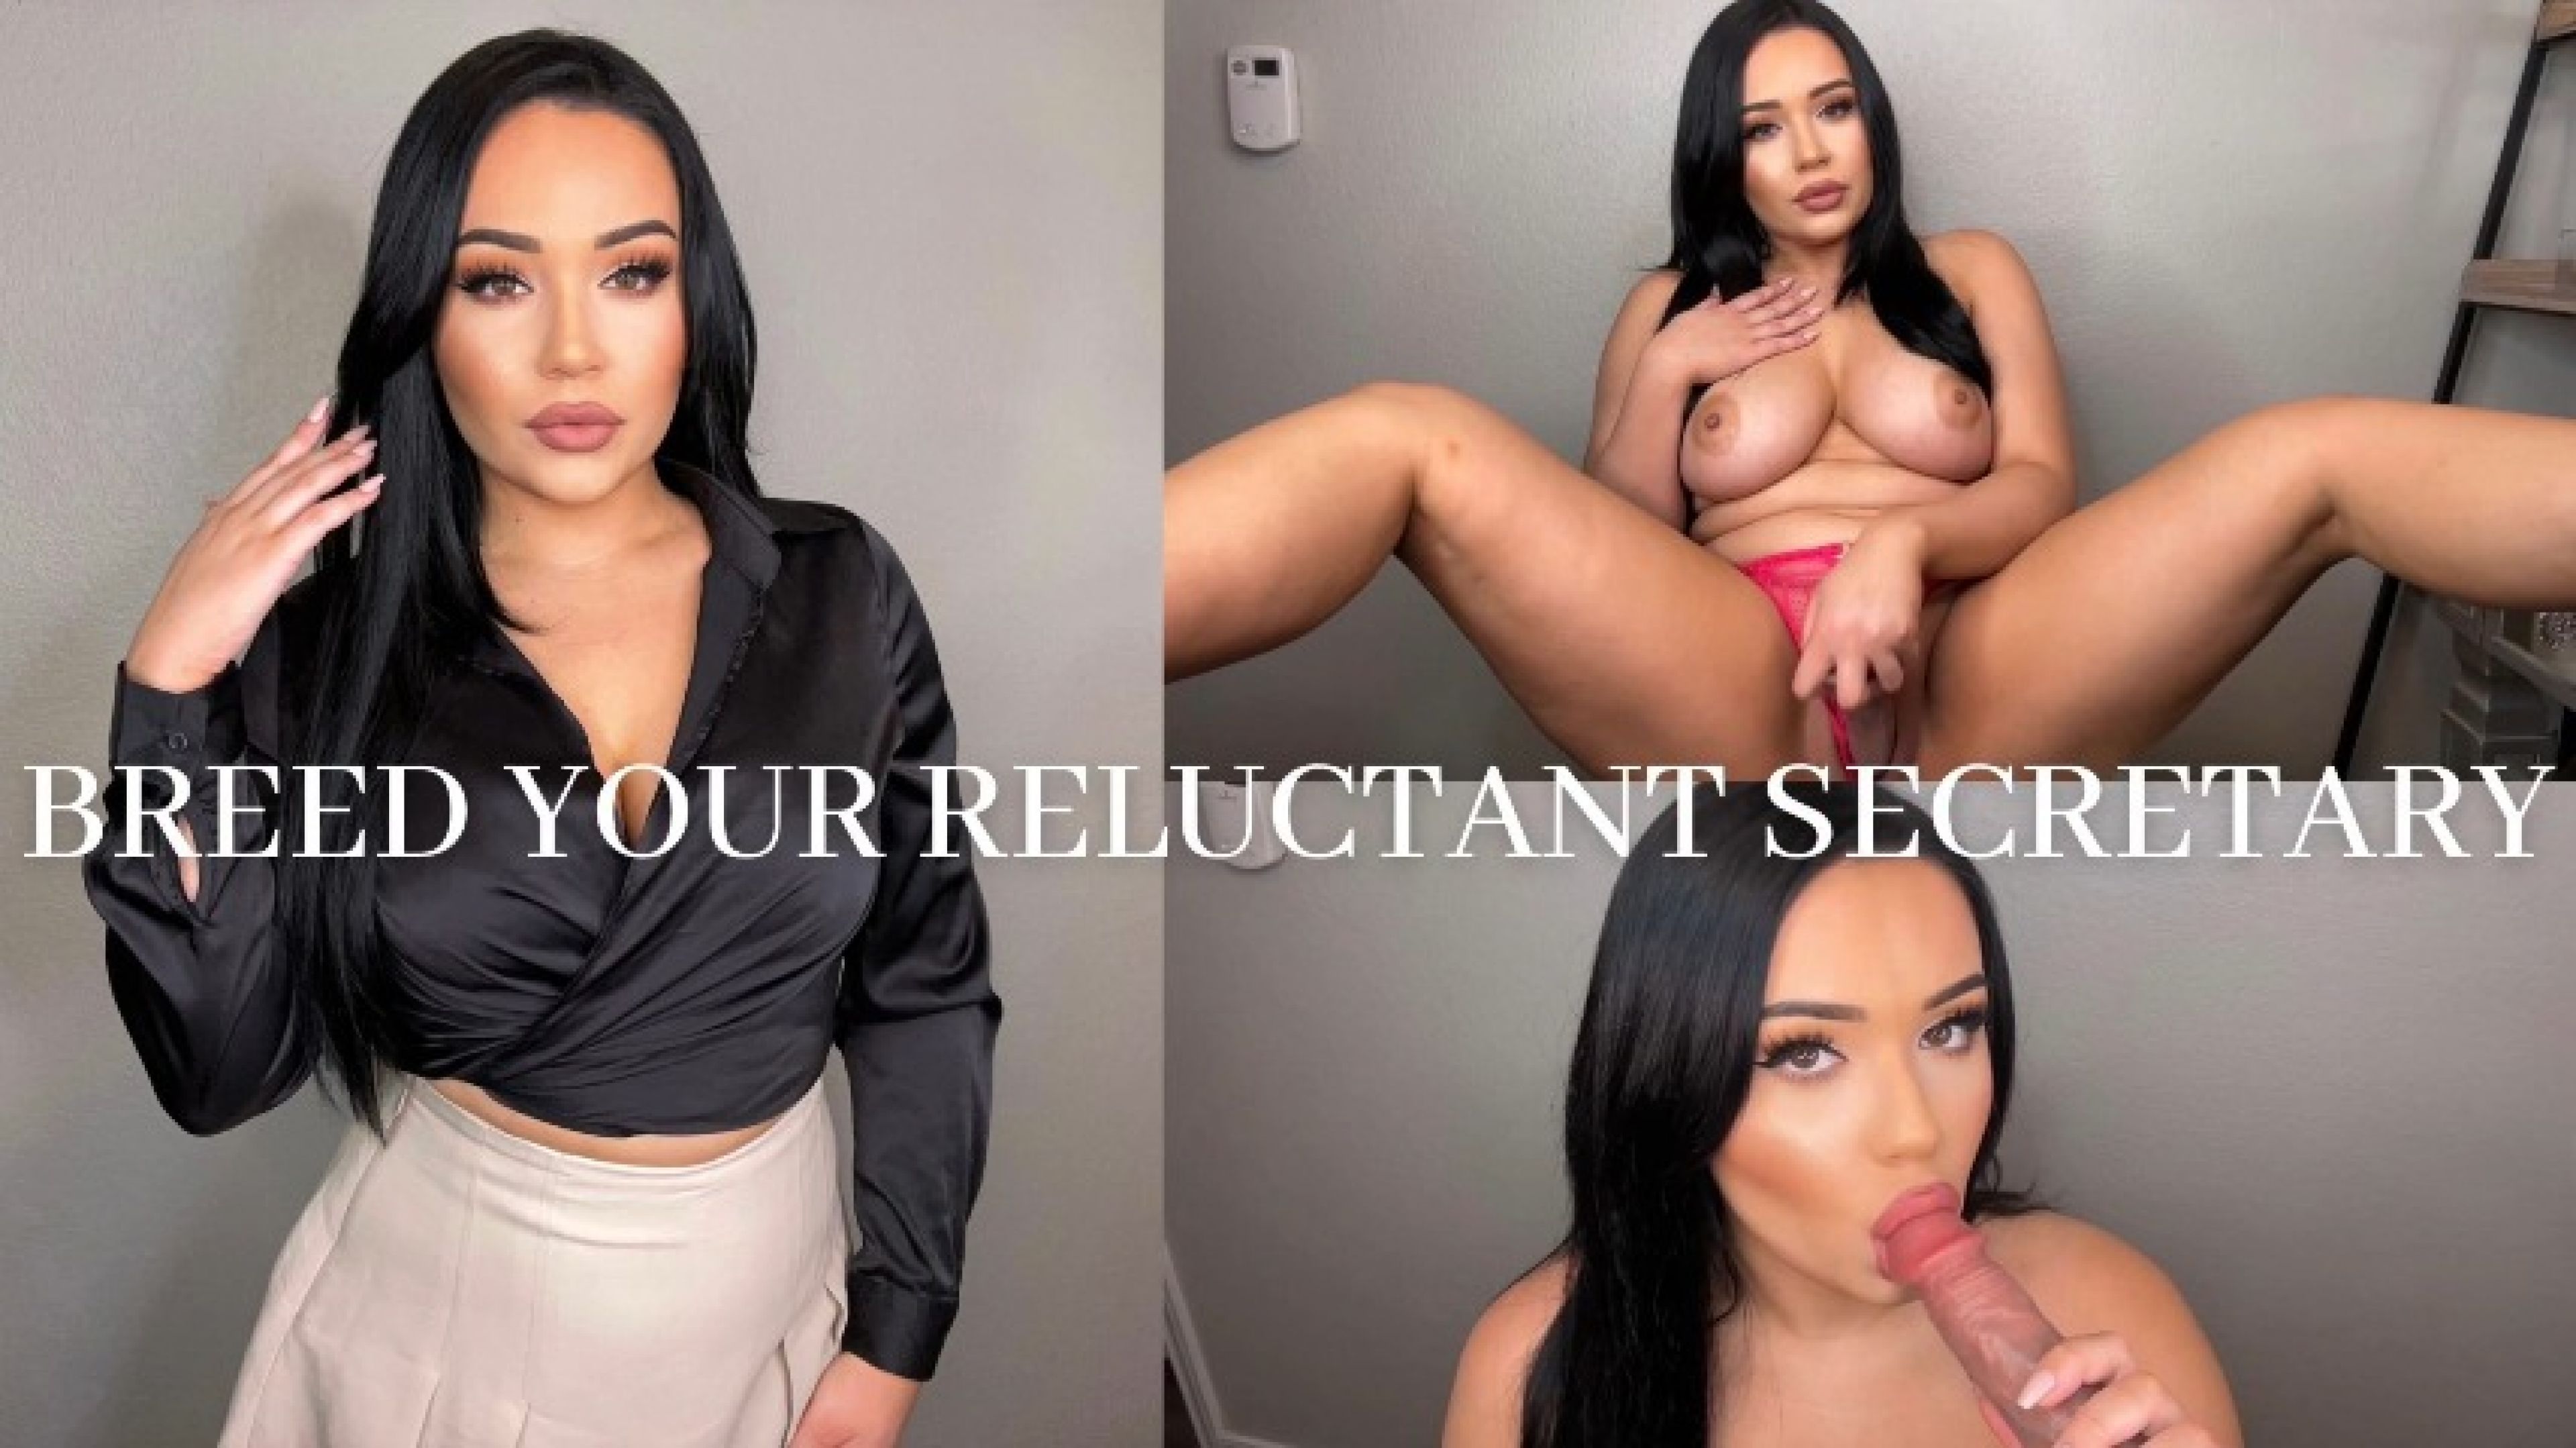 BREED YOUR RELUCTANT SECRETARY